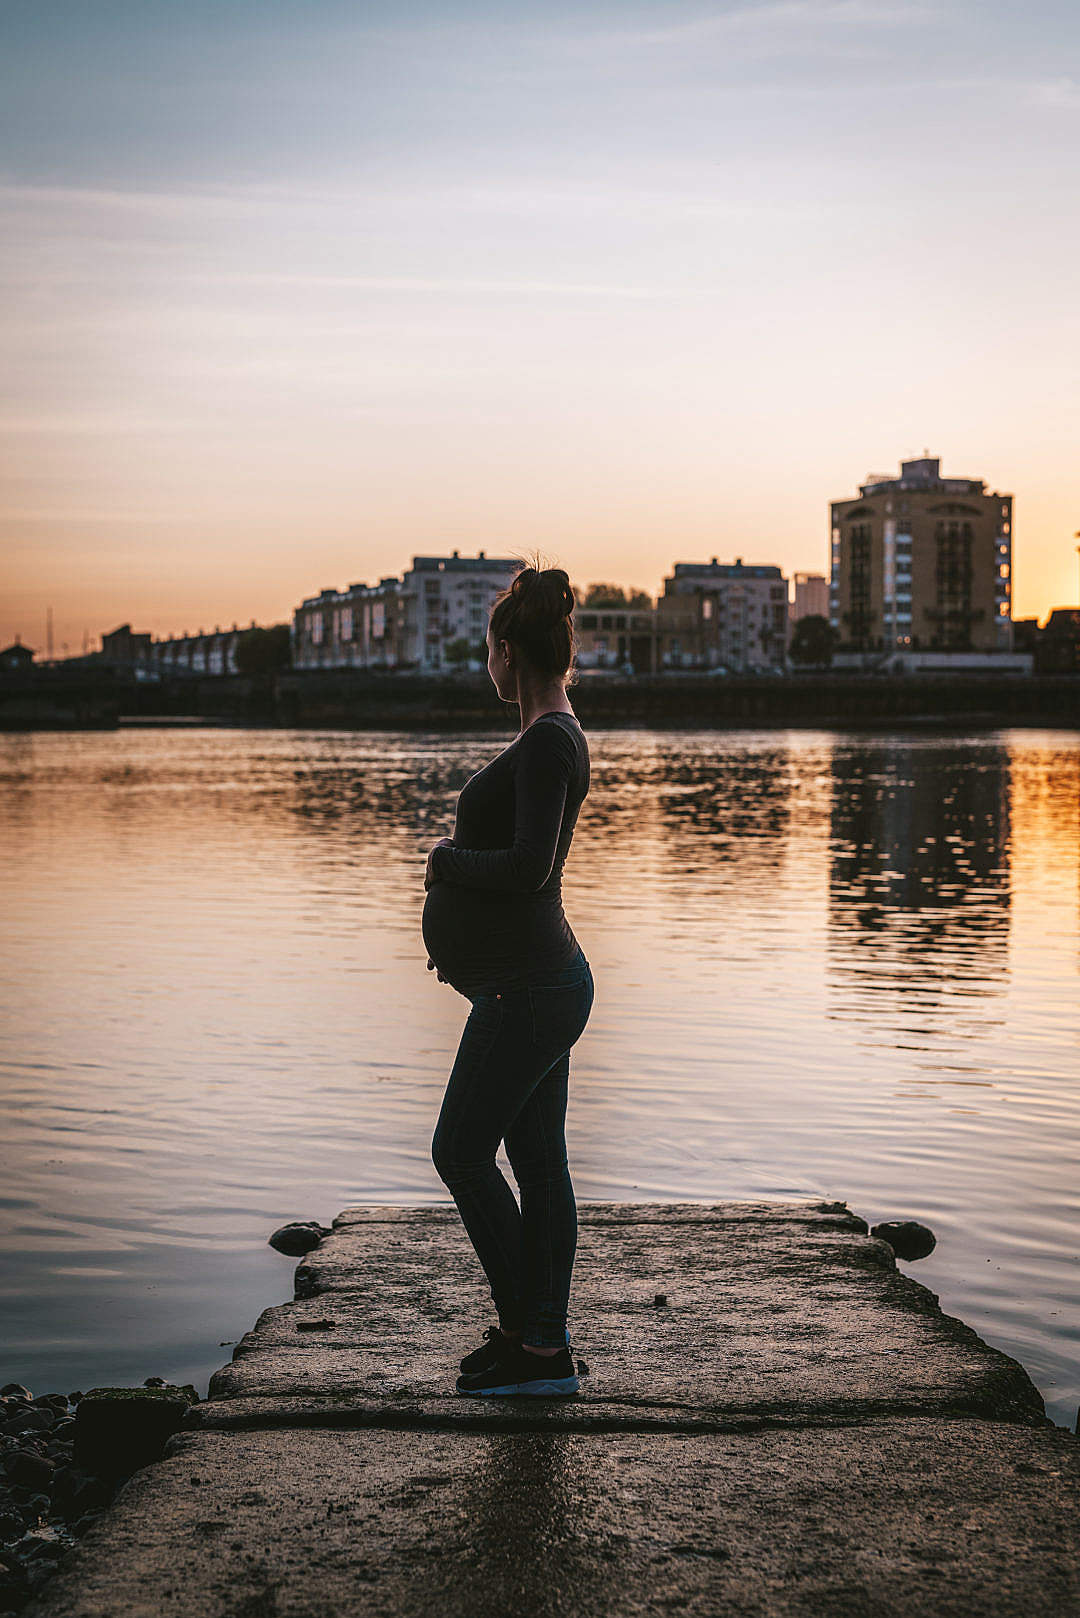 Download Pregnant Woman Enjoying Sunset by the River FREE Stock Photo